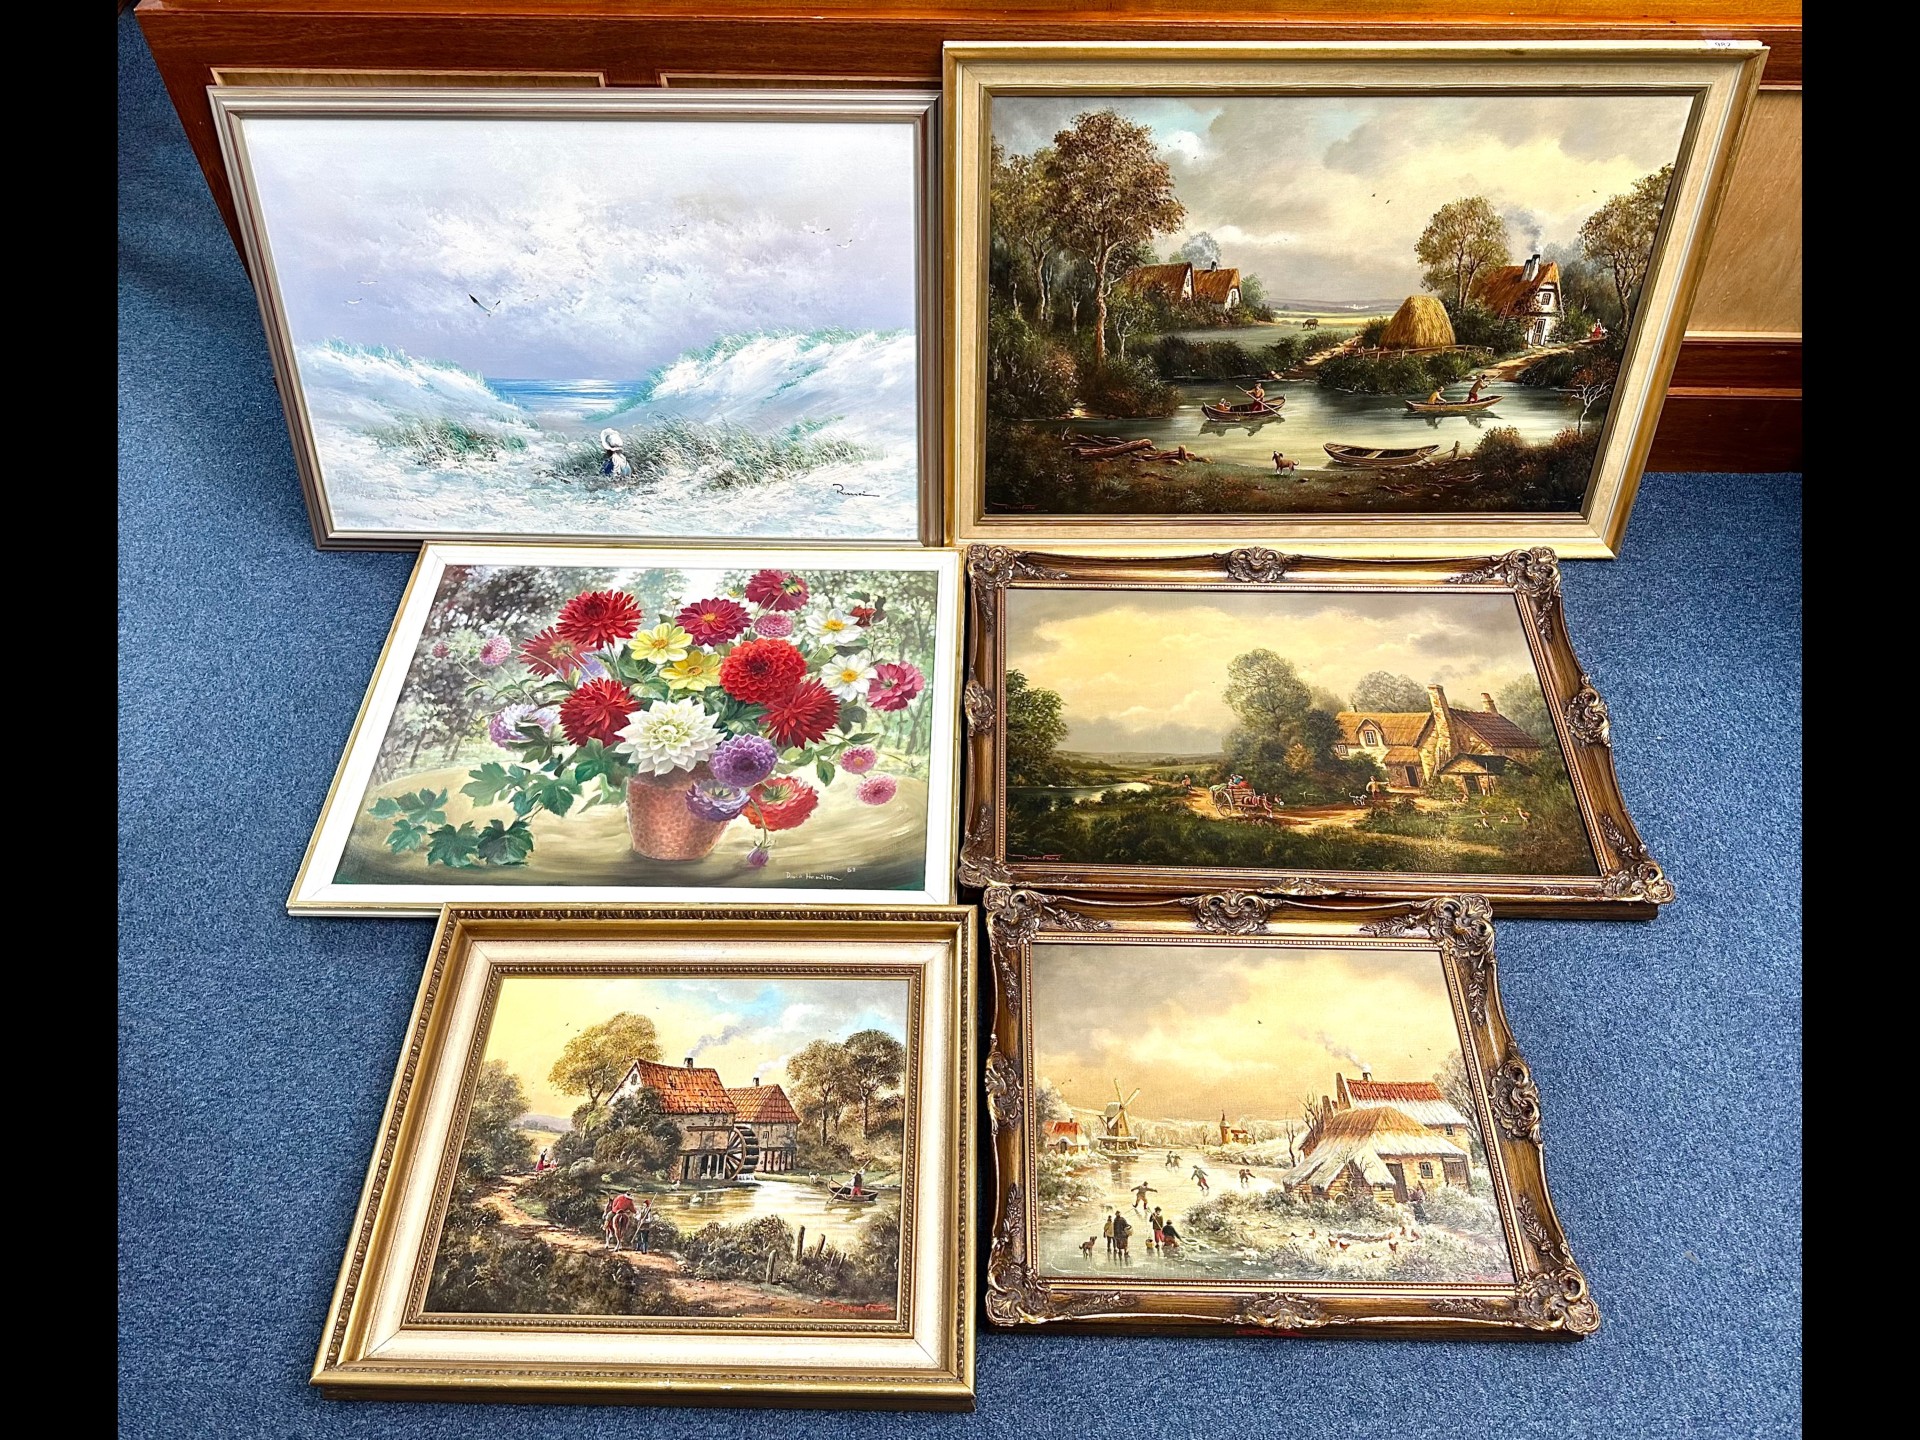 Collection of Six Oil on Canvas Paintings, mid to late 20th Century, mostly landscapes. All